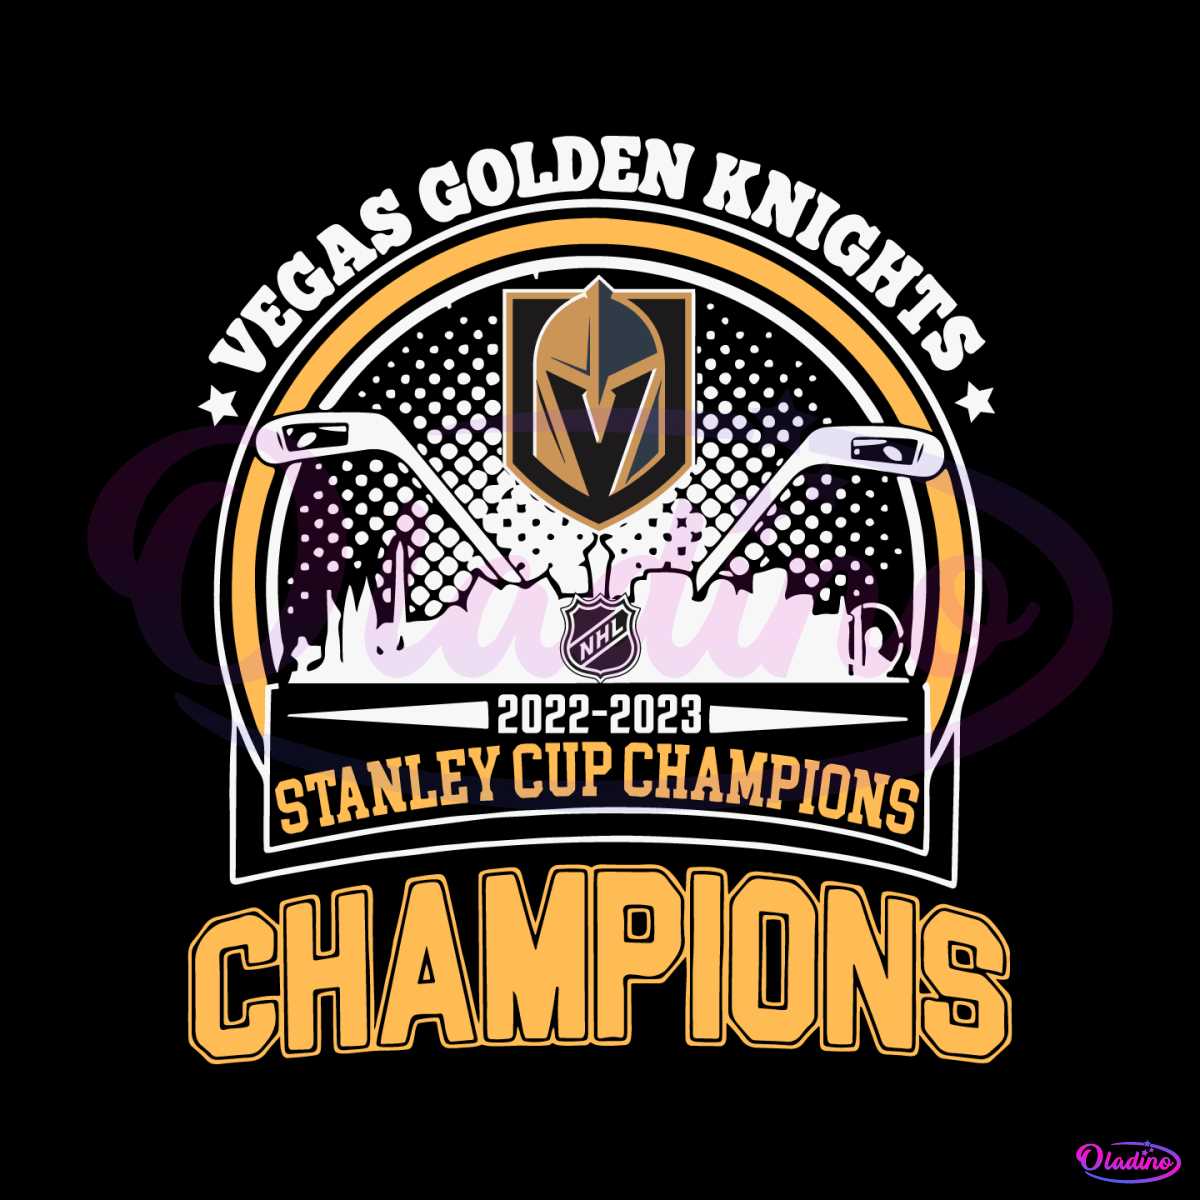 Vegas Golden Knights Stanley Cup Champions 2023 Custom Name